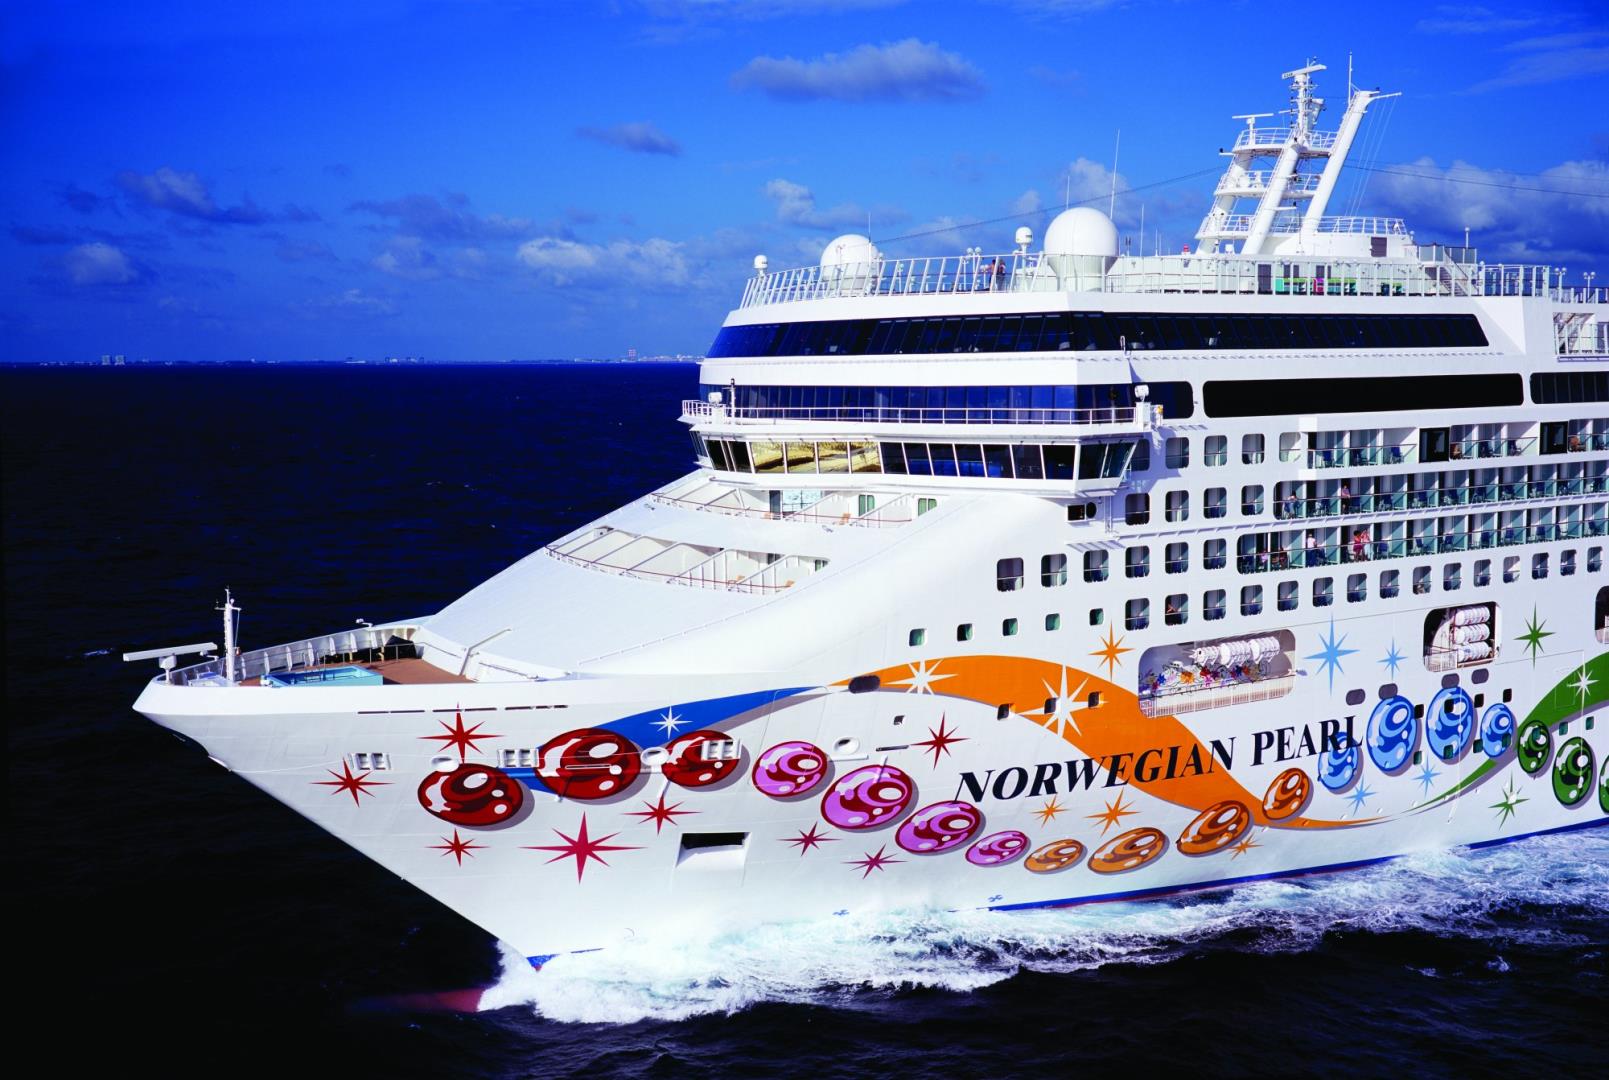 3-day Cruise to Bahamas: Great Stirrup Cay & Nassau from Miami, Florida on Norwegian Pearl